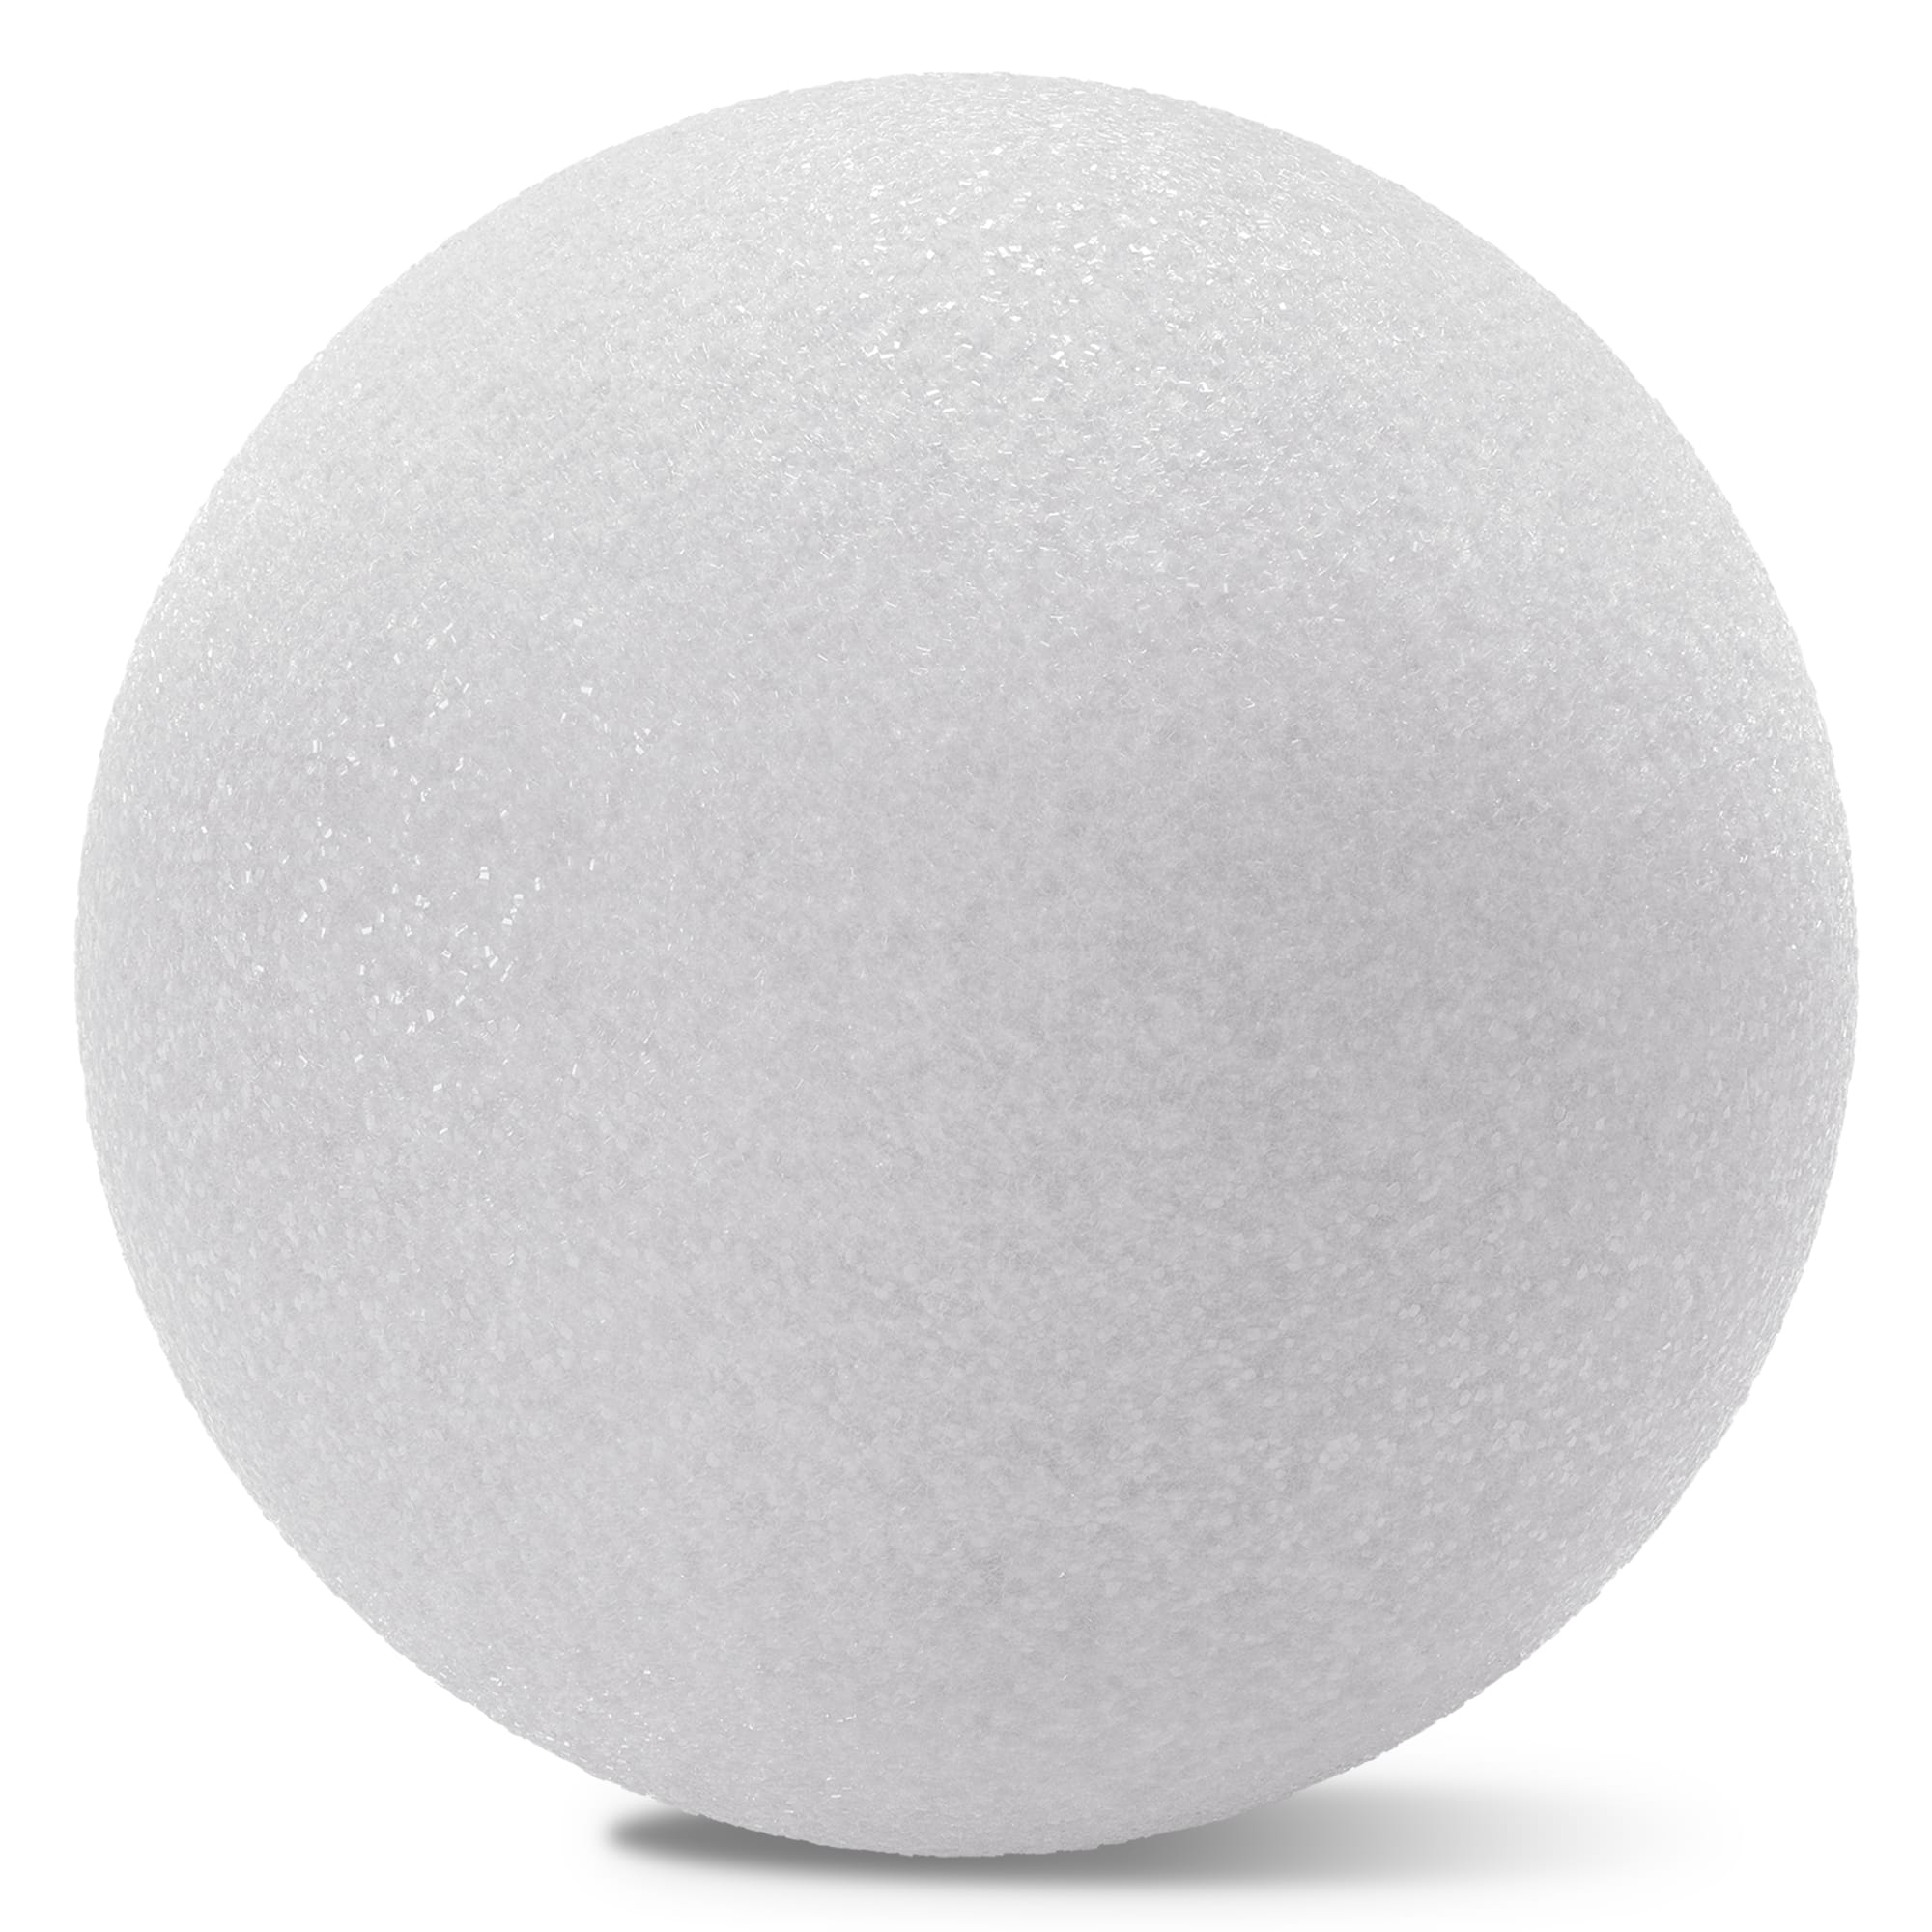 Hygloss Products Foam Discs - Craft Foam (XPS) for Projects, Arts, &  Crafts, 6 x 1 Circles, White, 12 Pieces